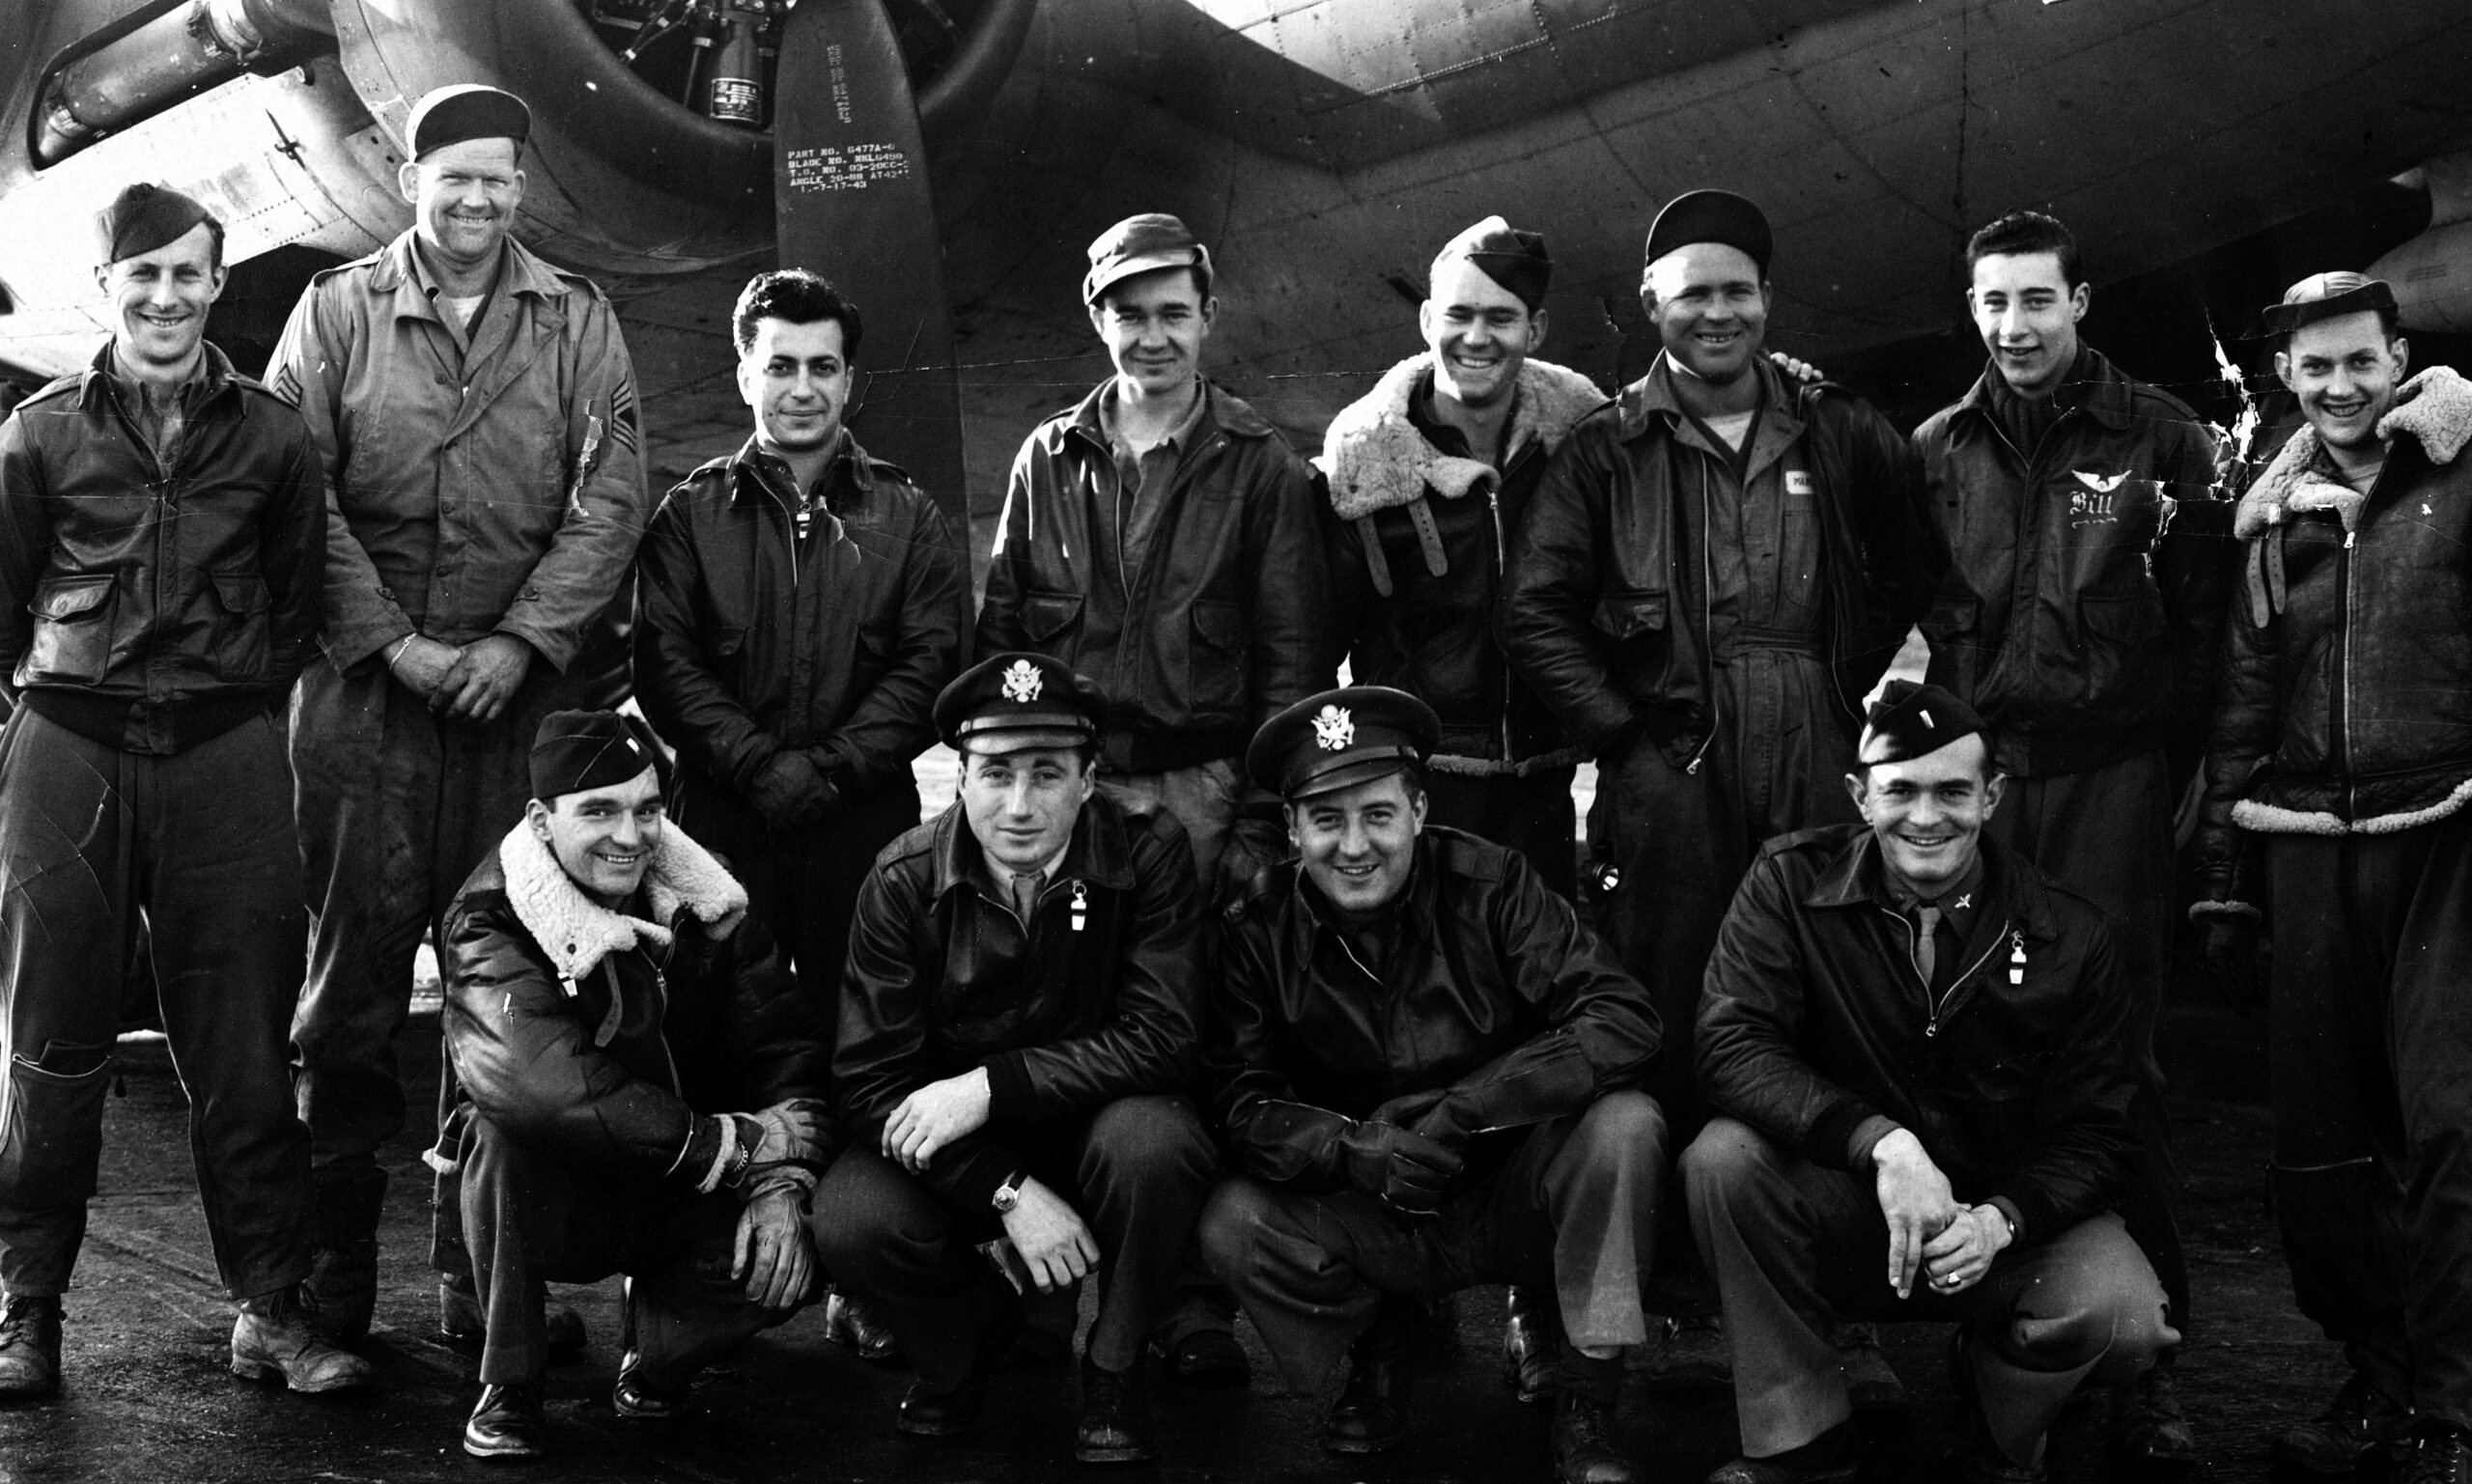 Members of the 100th Bomb Group. Photo courtesy of Apple TV+.